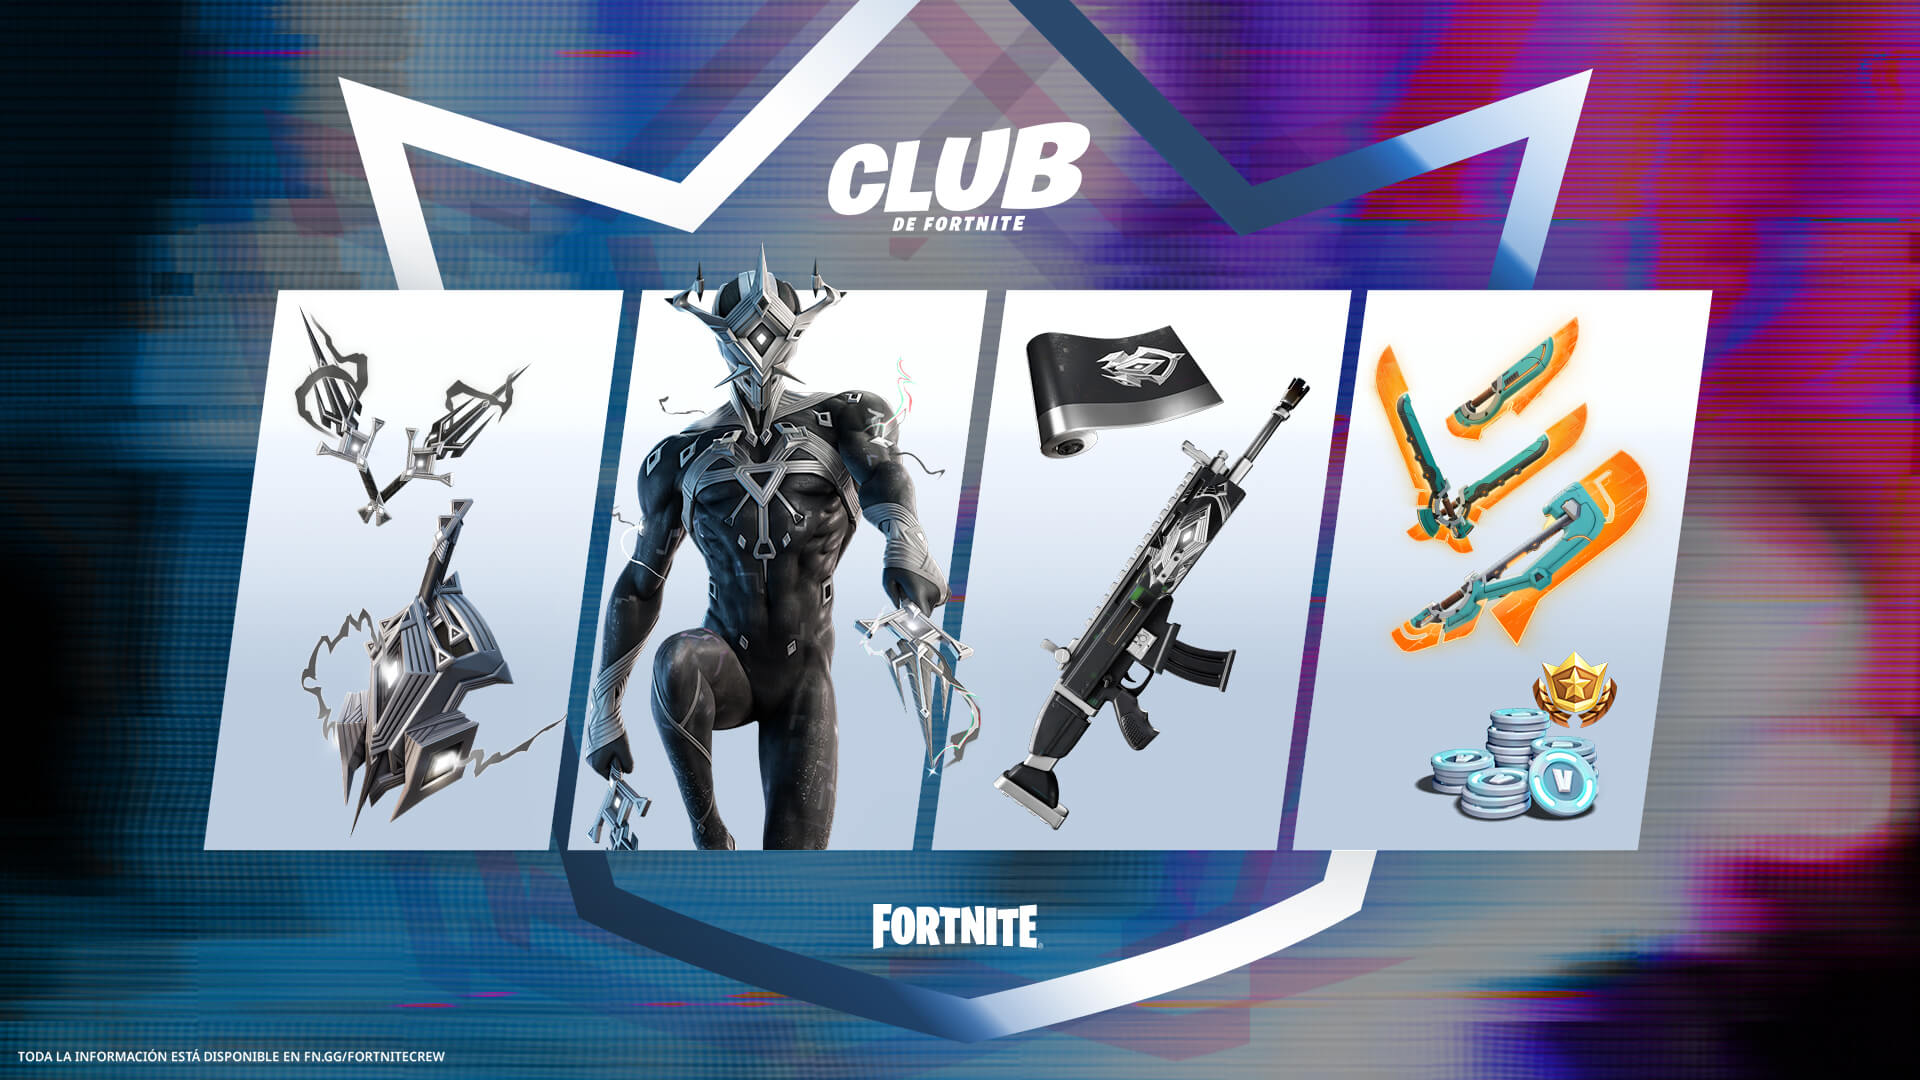 Get to know the content of the Fortnite Club pack in April 2023, which includes the skin or outfit and cosmetics of the new character Nox Triarca.